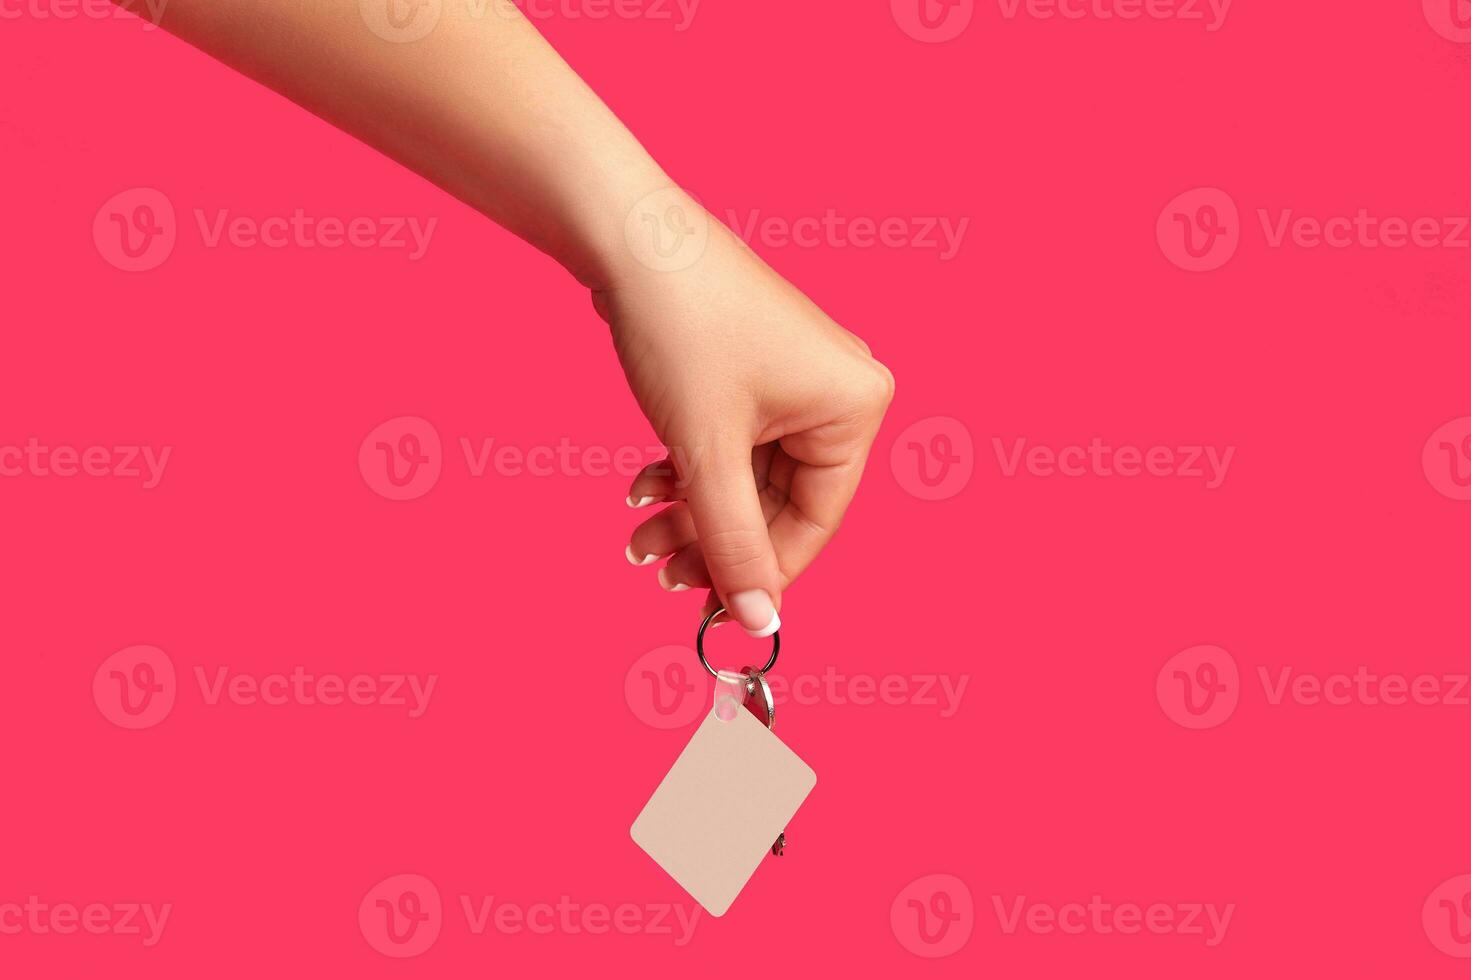 Hand of unrecognizable female is holding a key with empty white square plastic key fob on metal ring against pink background. Close up, copy space photo